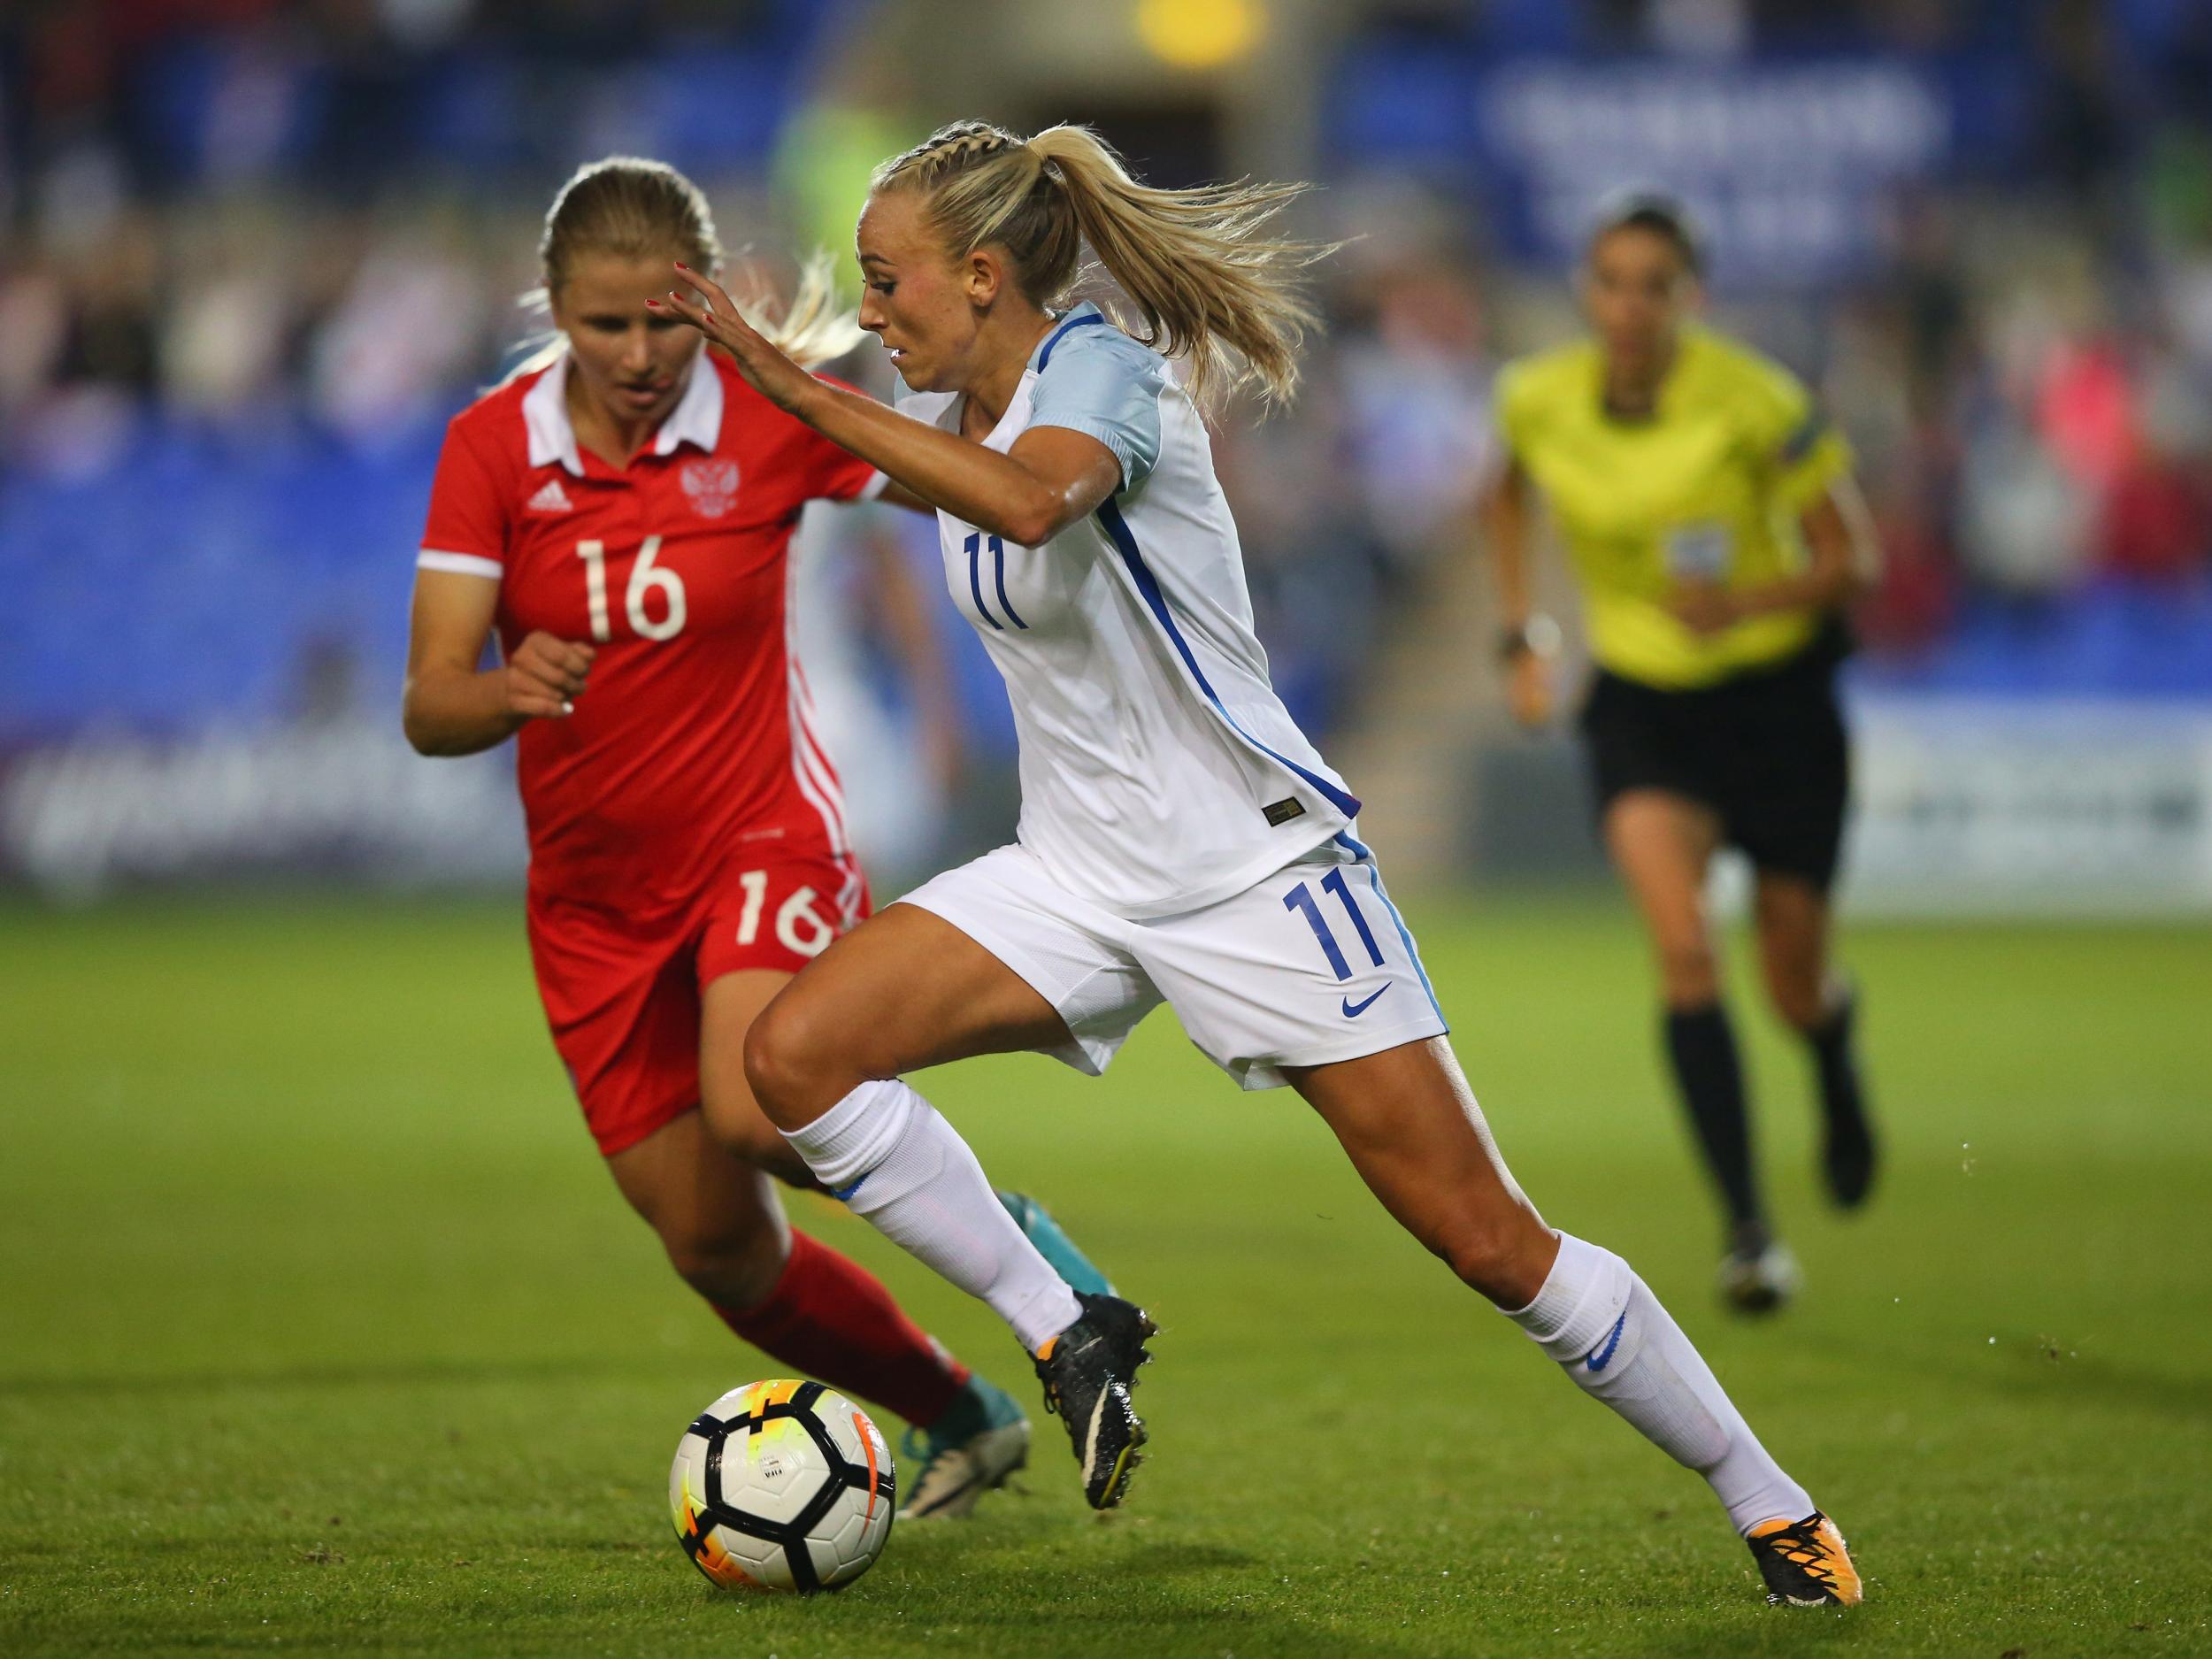 Toni Duggan is another of England's stars